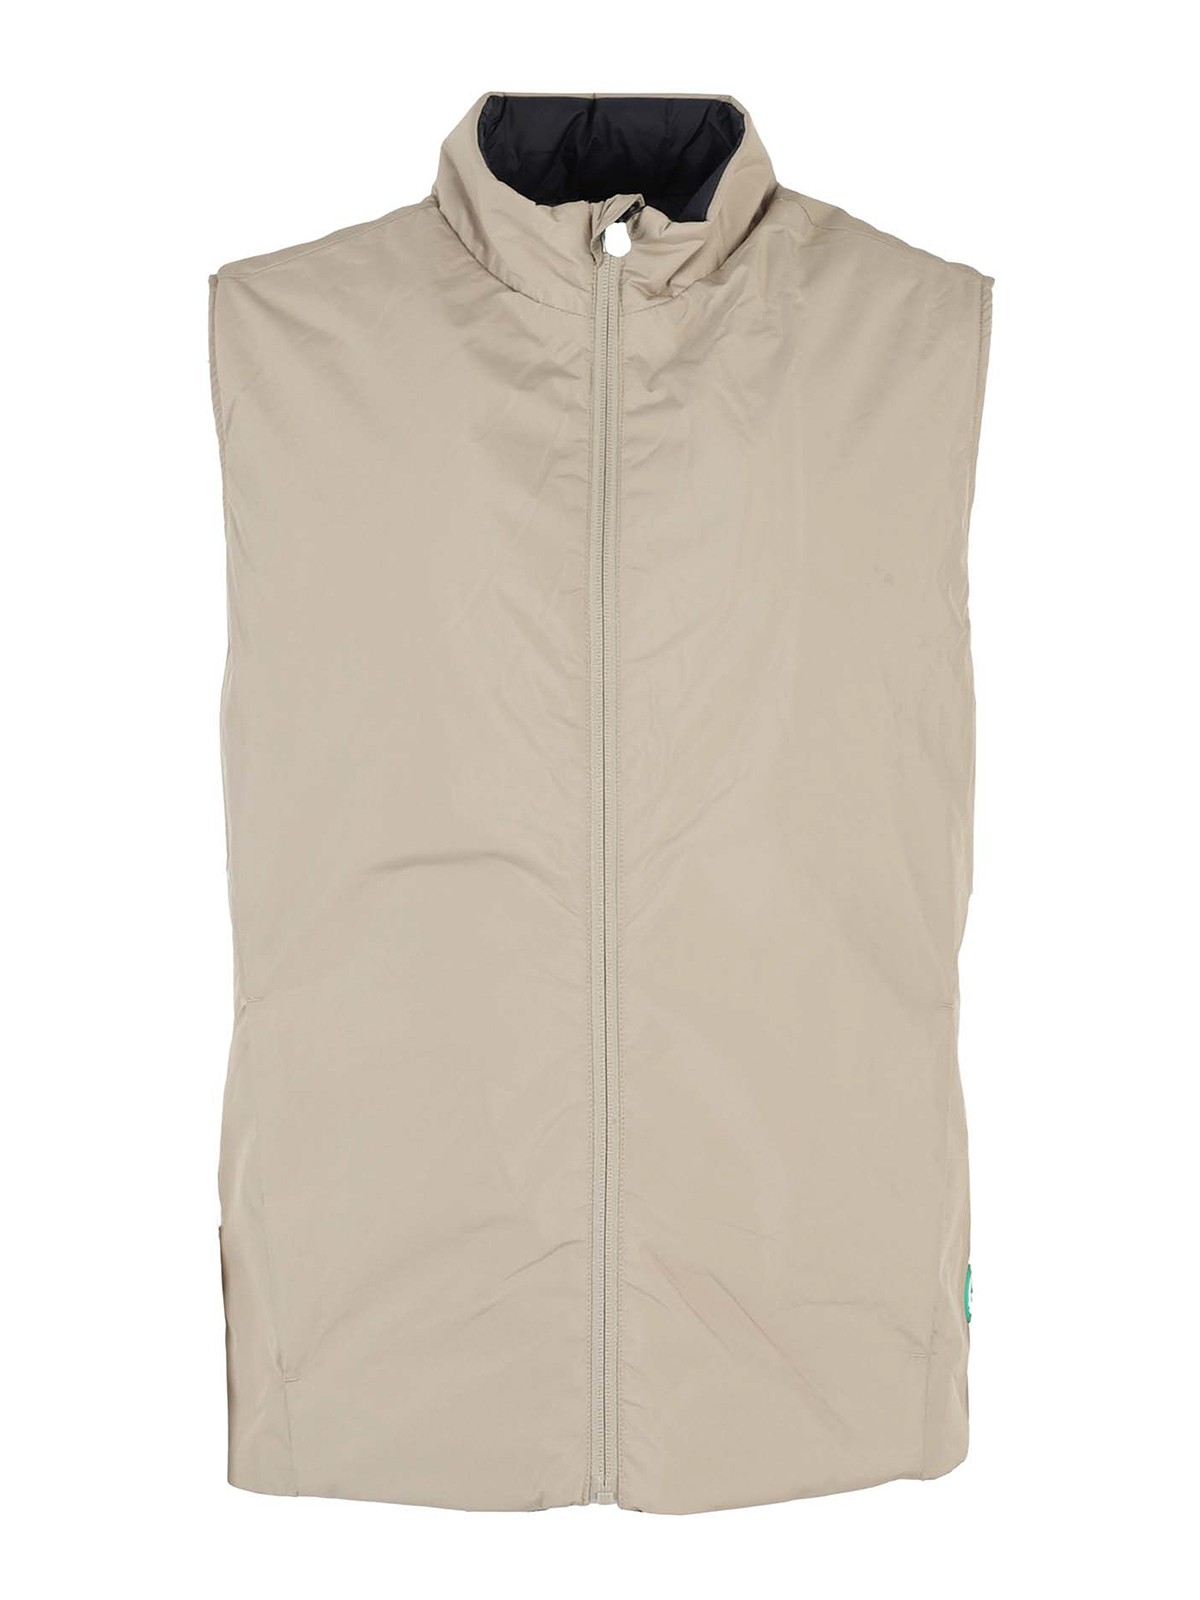 SAVE THE DUCK REVERSIBLE VEST